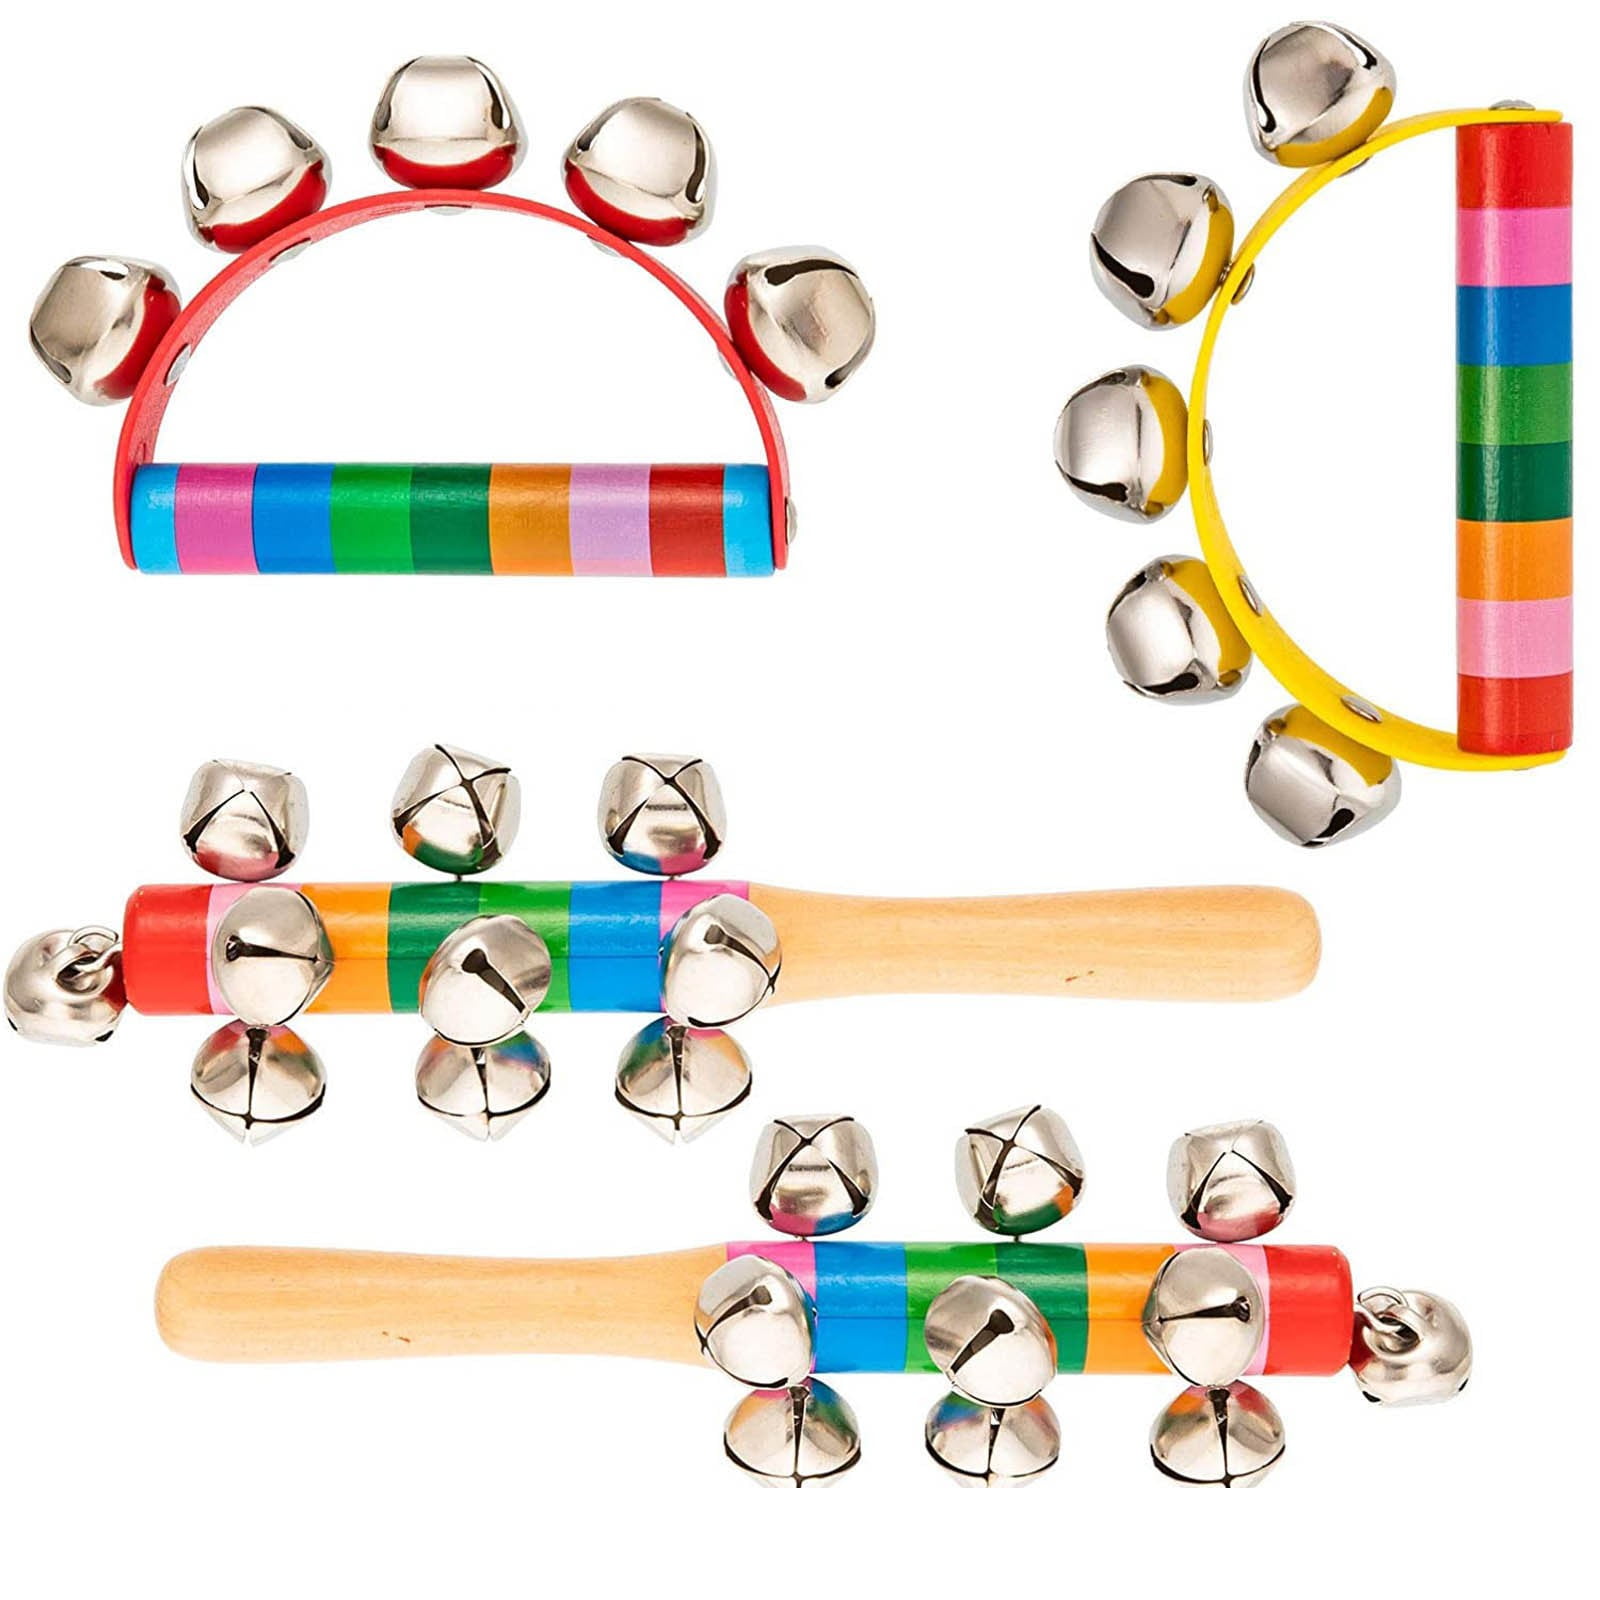 Hand Sleigh Bells 4pcs Christmas Jingle Bell for Children 18 x 5 x 3 cm Wooden Colorful Handle Musical Instrument Handbell Toys 